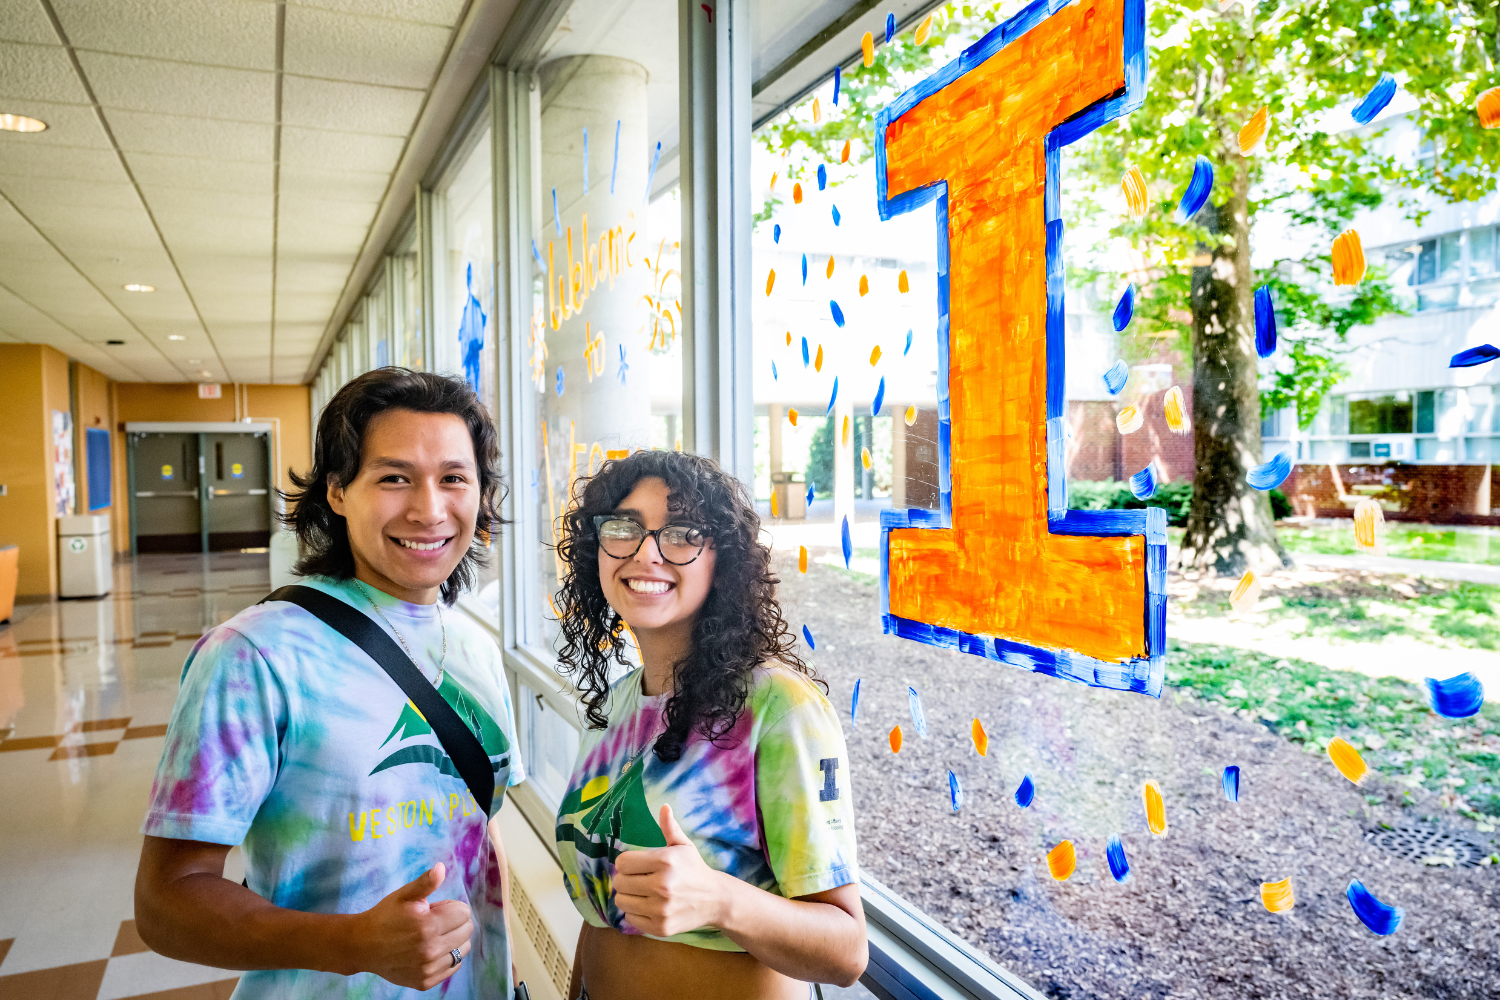 students smiling in front of decorated window